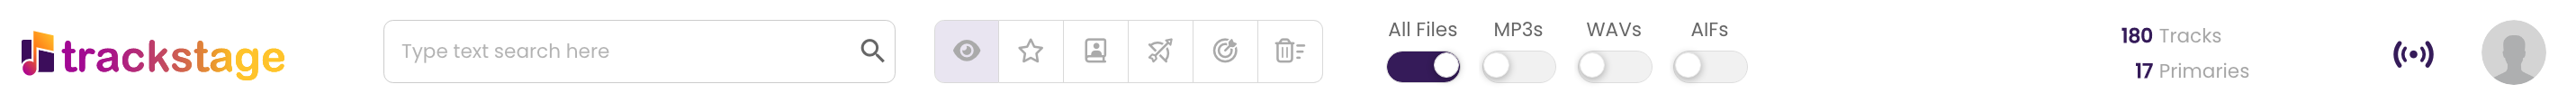 Search and Filter buttons in the TrackStage Header.